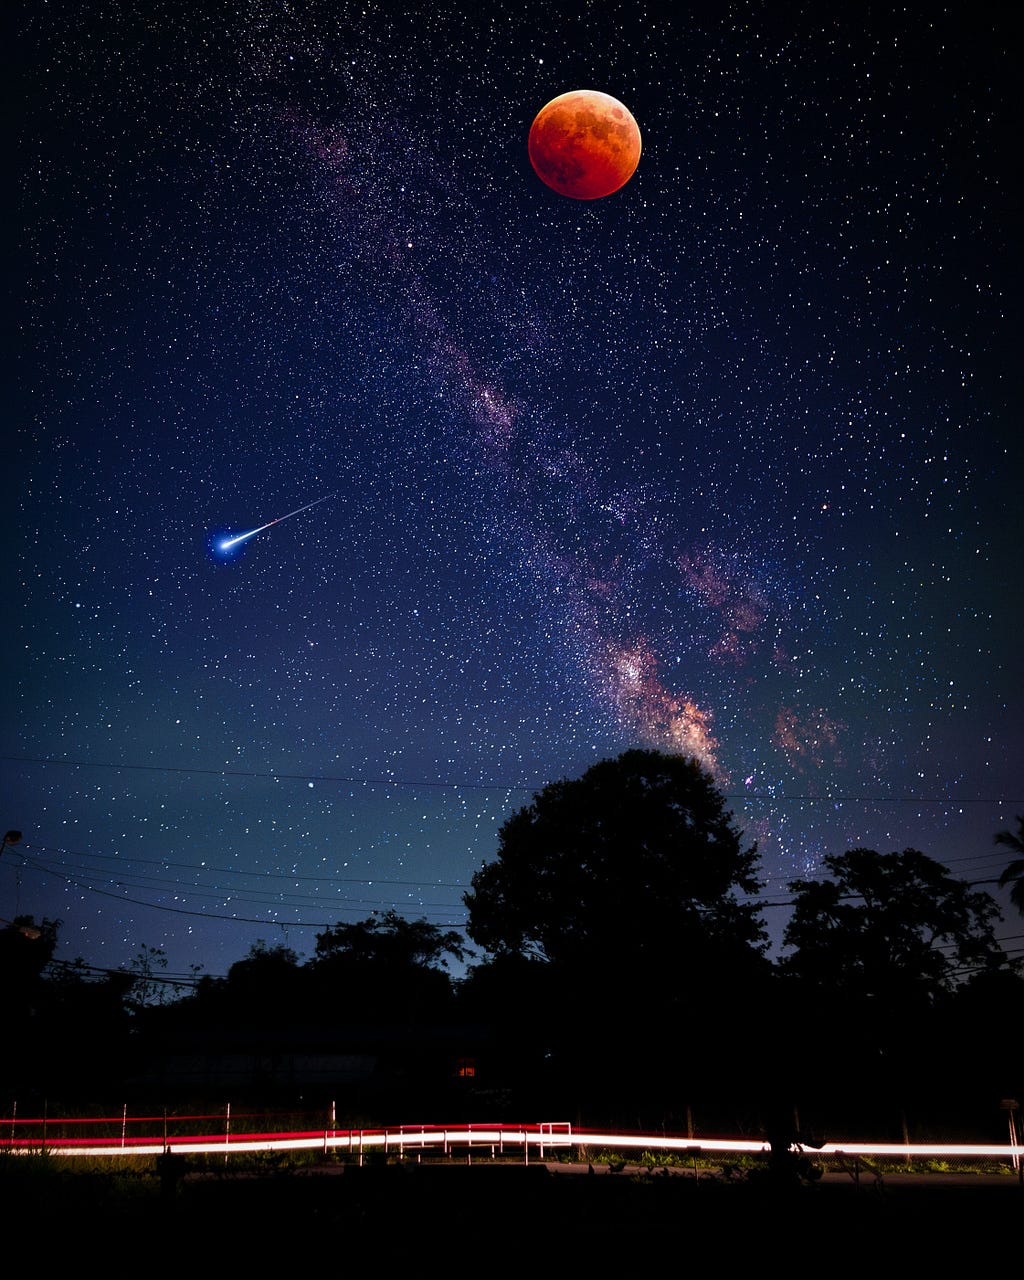 This is an image of the sky at night. There are a lot of bright stars in the sky. On the one hand, we can see the red moon. On the other hand, we can see an asteroid falling from space to the earth. The image has been taken from the ground where we can also see trees appearing black.